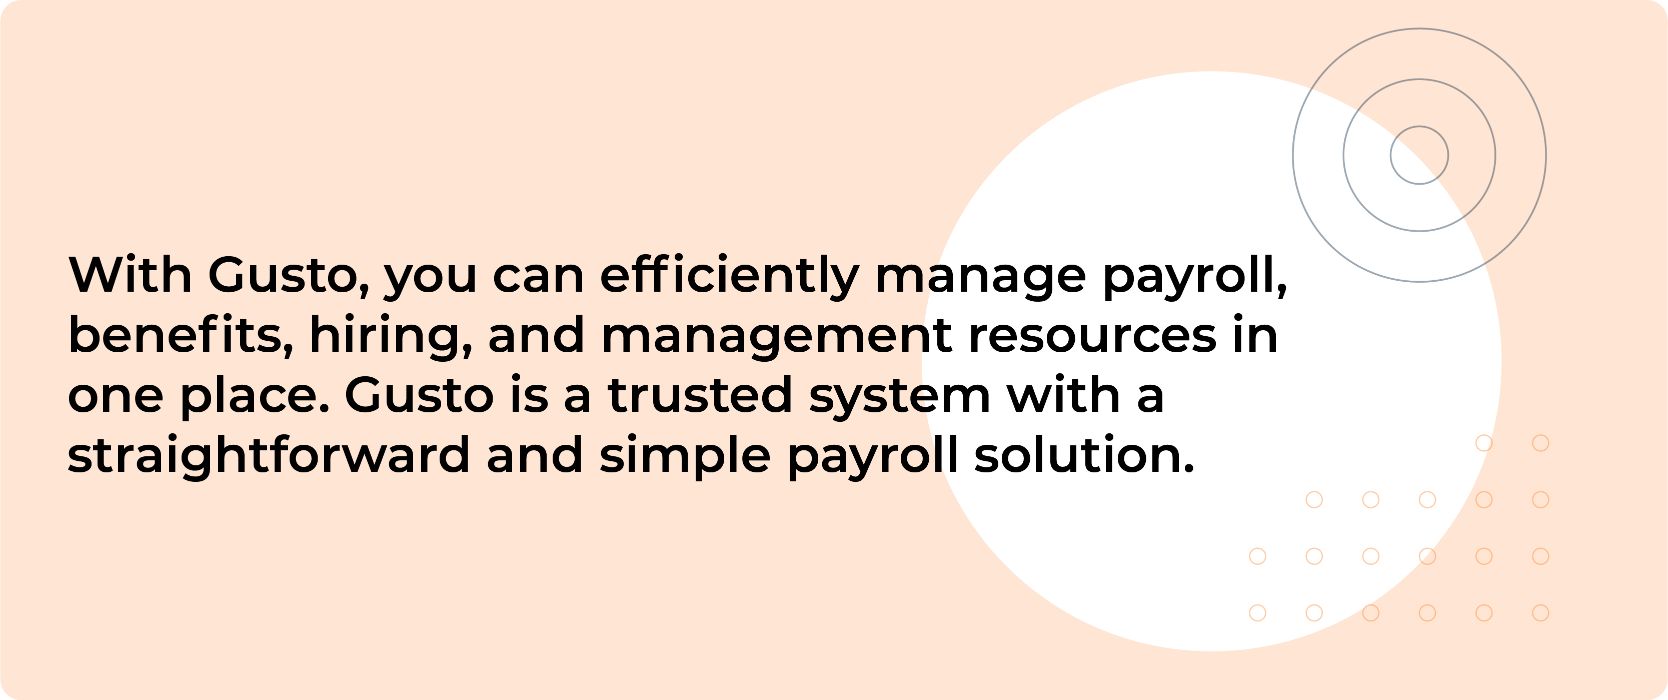 What is the cheapest payroll service for a small business?